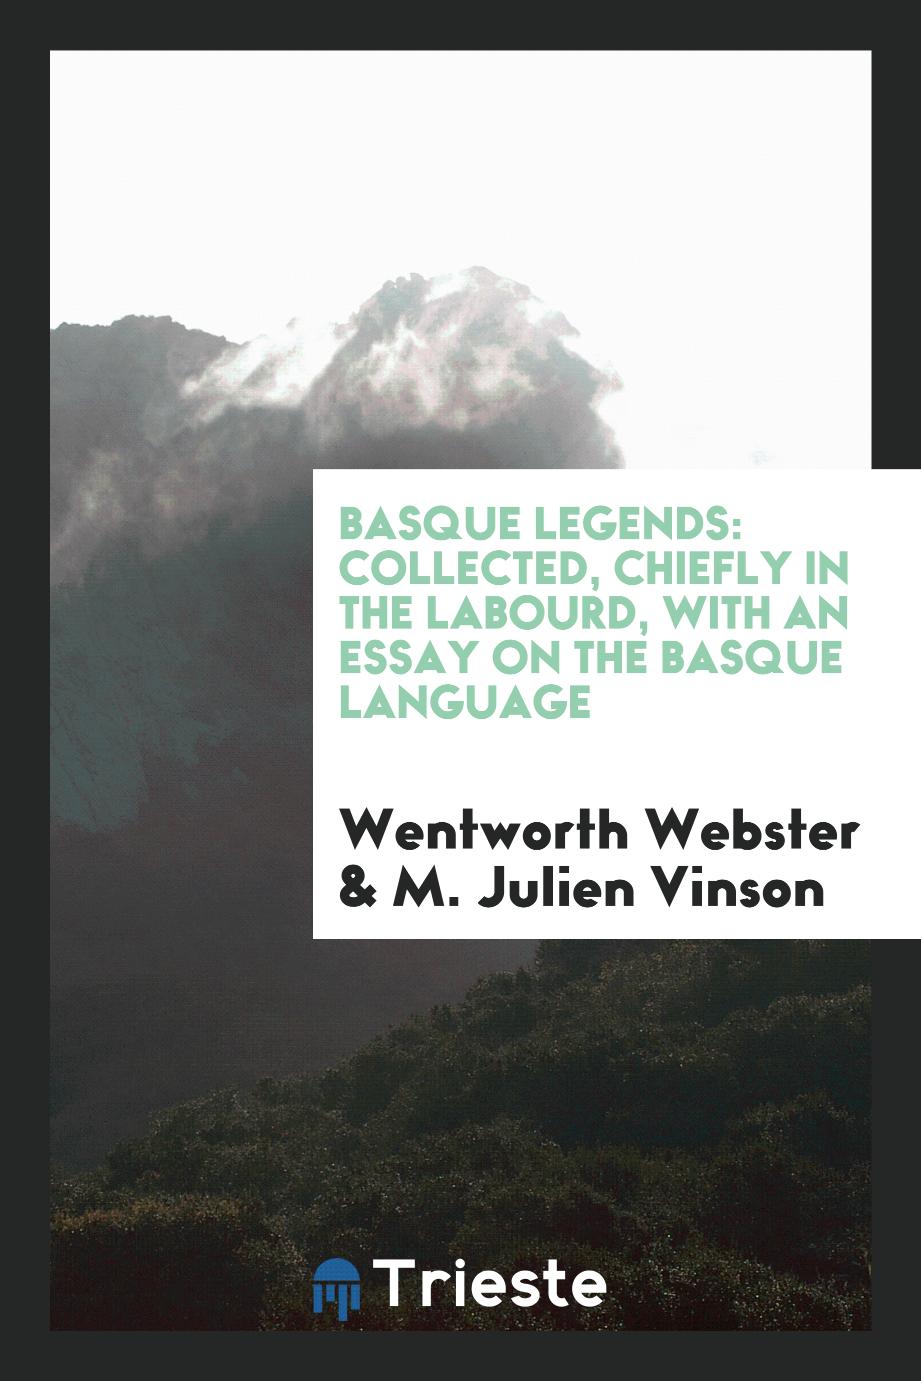 Basque Legends: Collected, Chiefly in the Labourd, with an Essay on the Basque Language